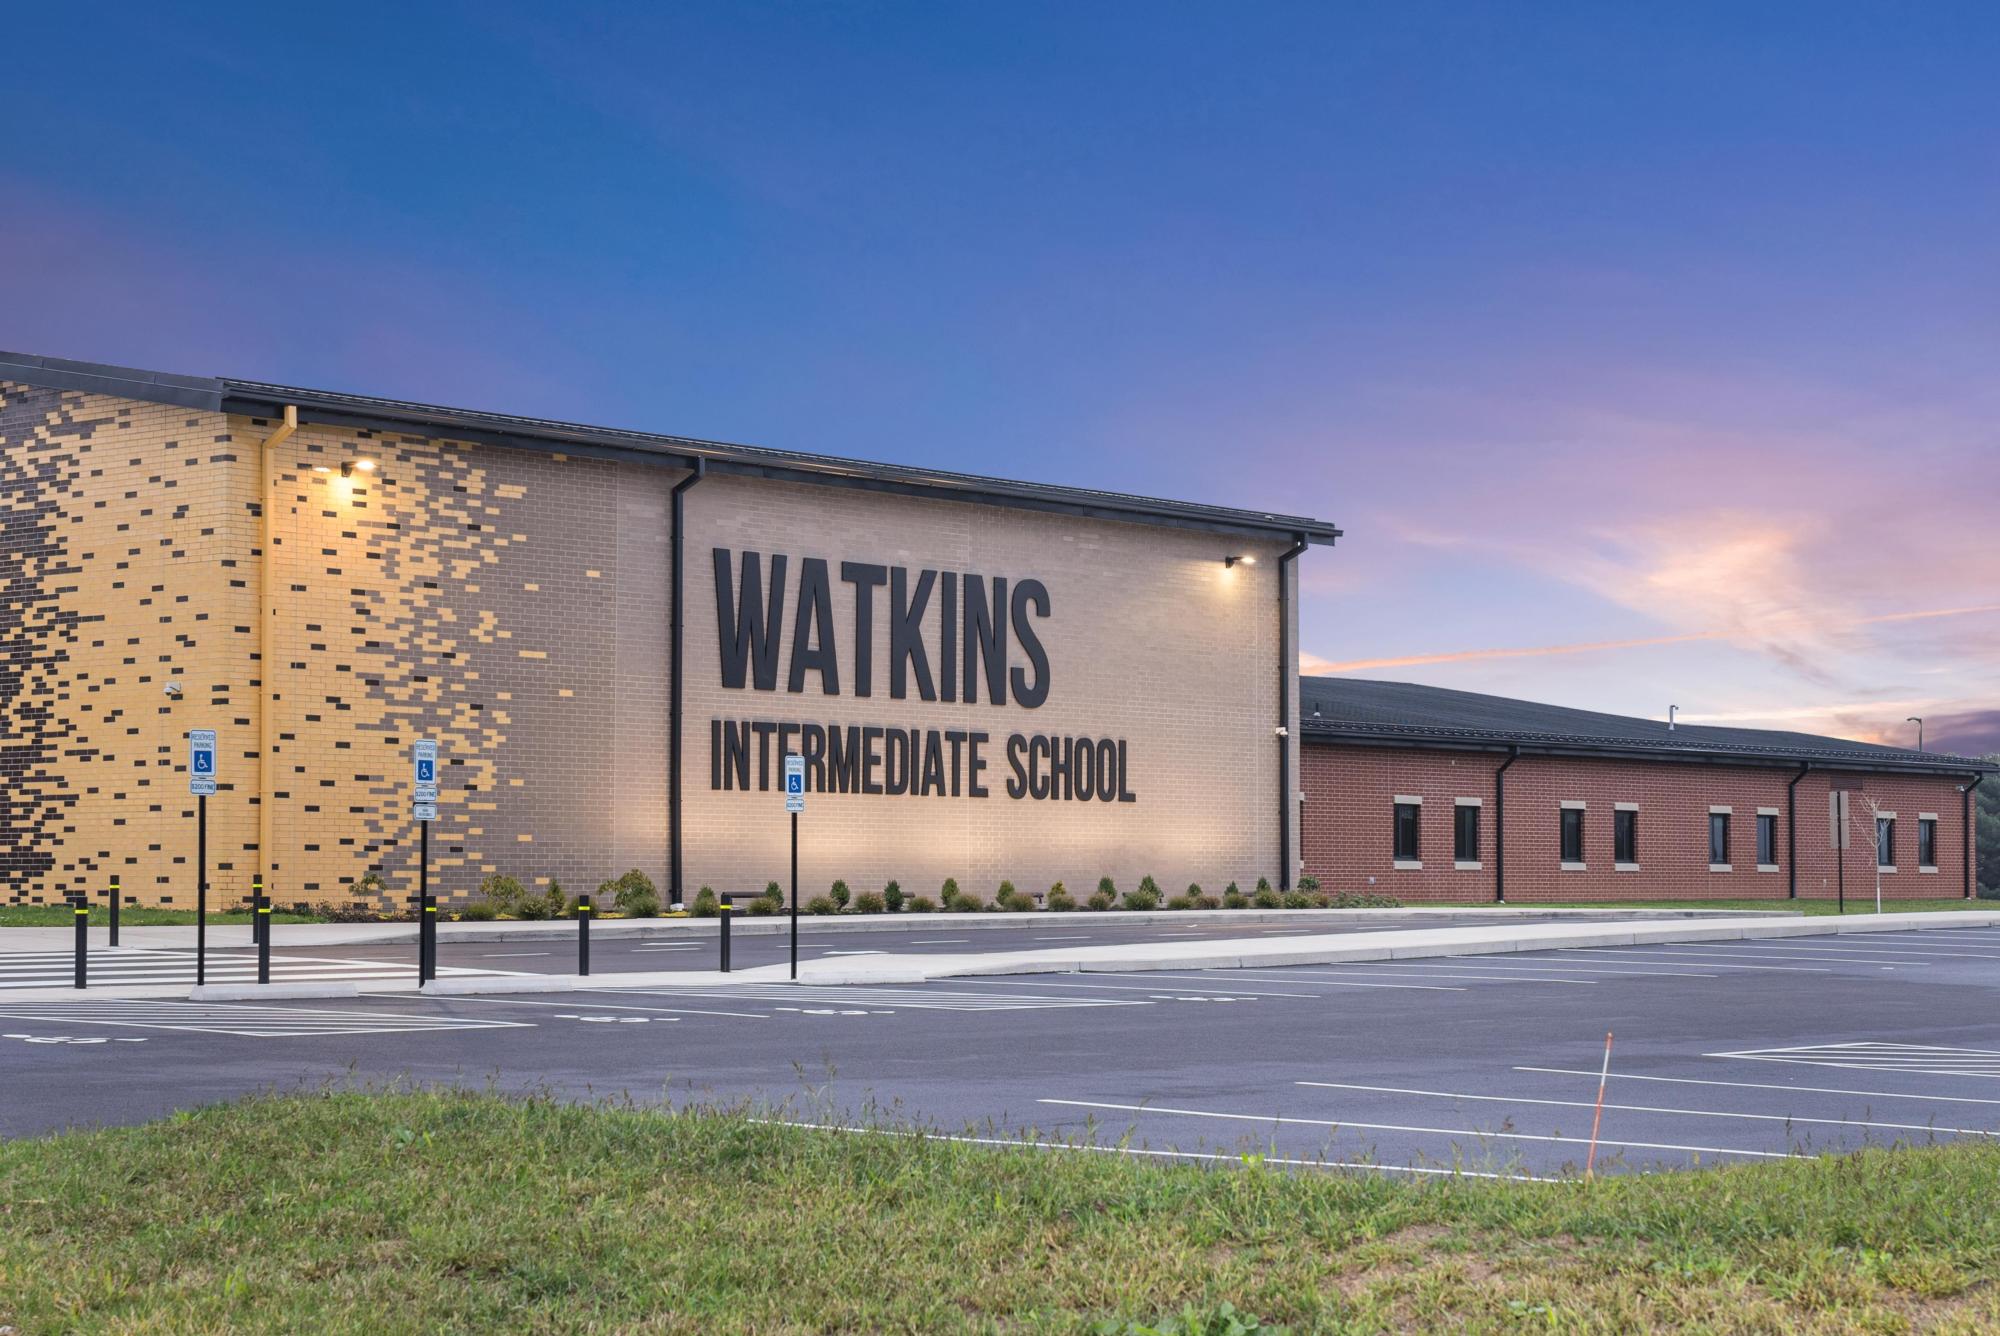 Watkins Elementary School is patterned with darker brick within beige, with the occasional red brick wall